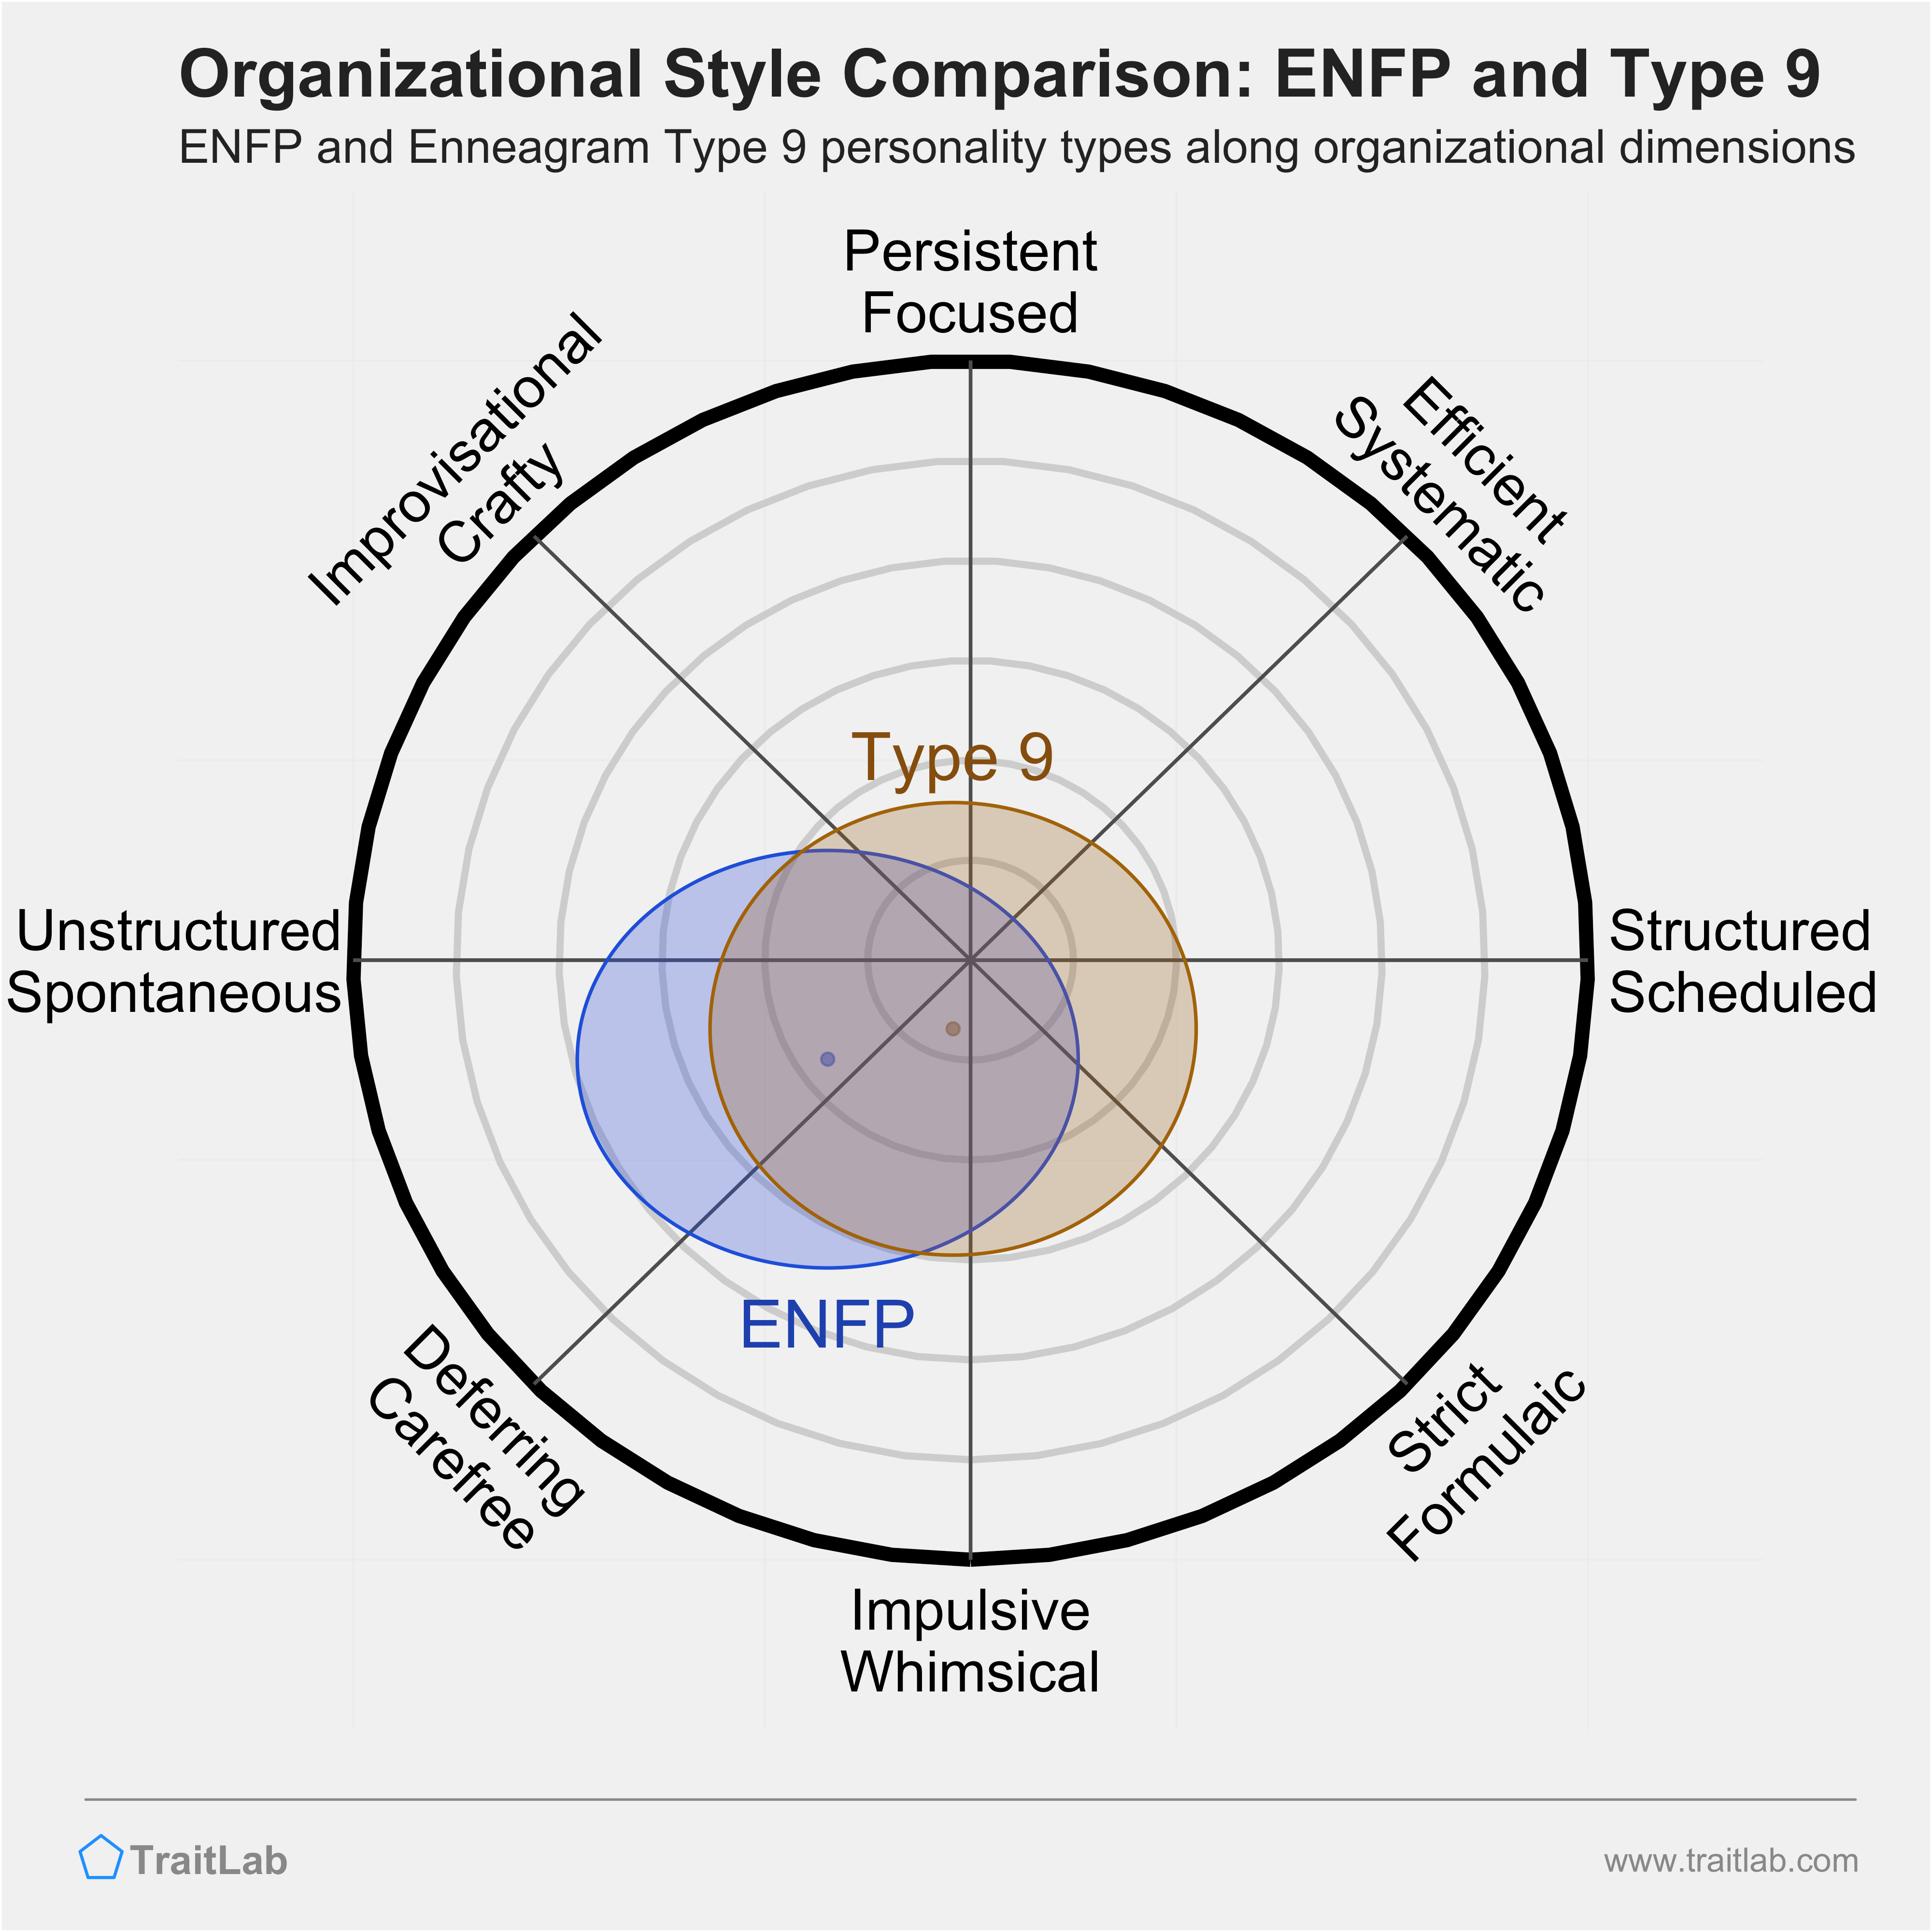 ENFP and Type 9 comparison across organizational dimensions